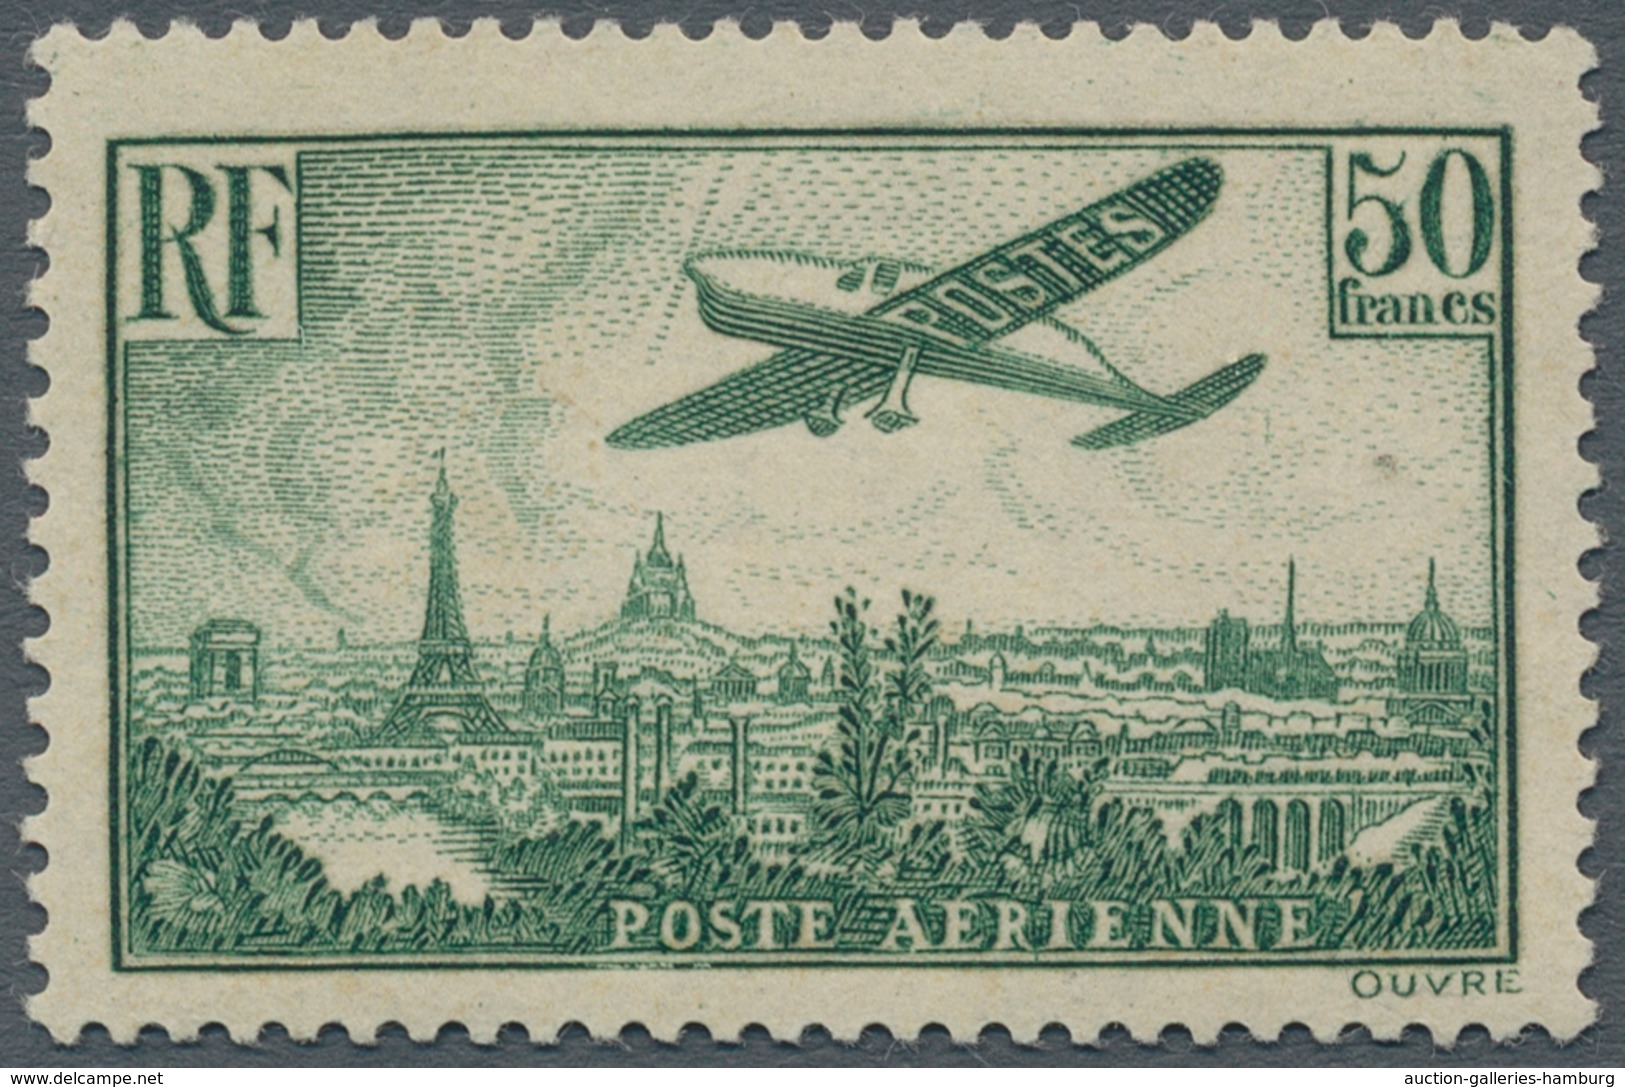 Frankreich: 1936, Airplane Over Paris, 50 Fr Dark Green, Mint And Rare Offered!, Signed (Mi€2.000,-) - Used Stamps